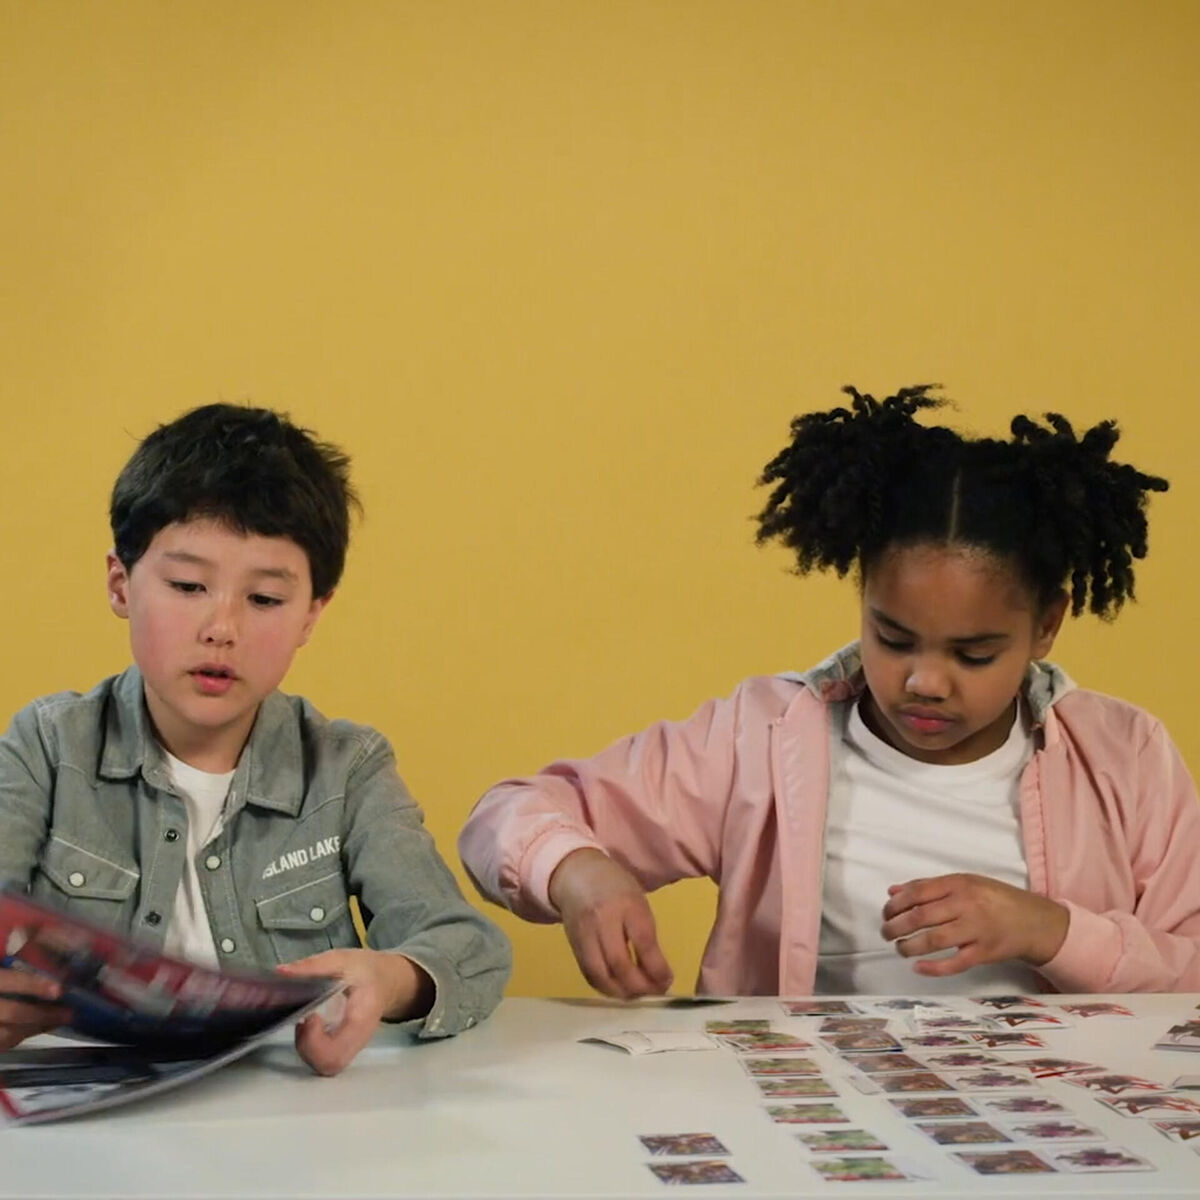 Watch our young concept testers putting Marvel Be a Hero to the test